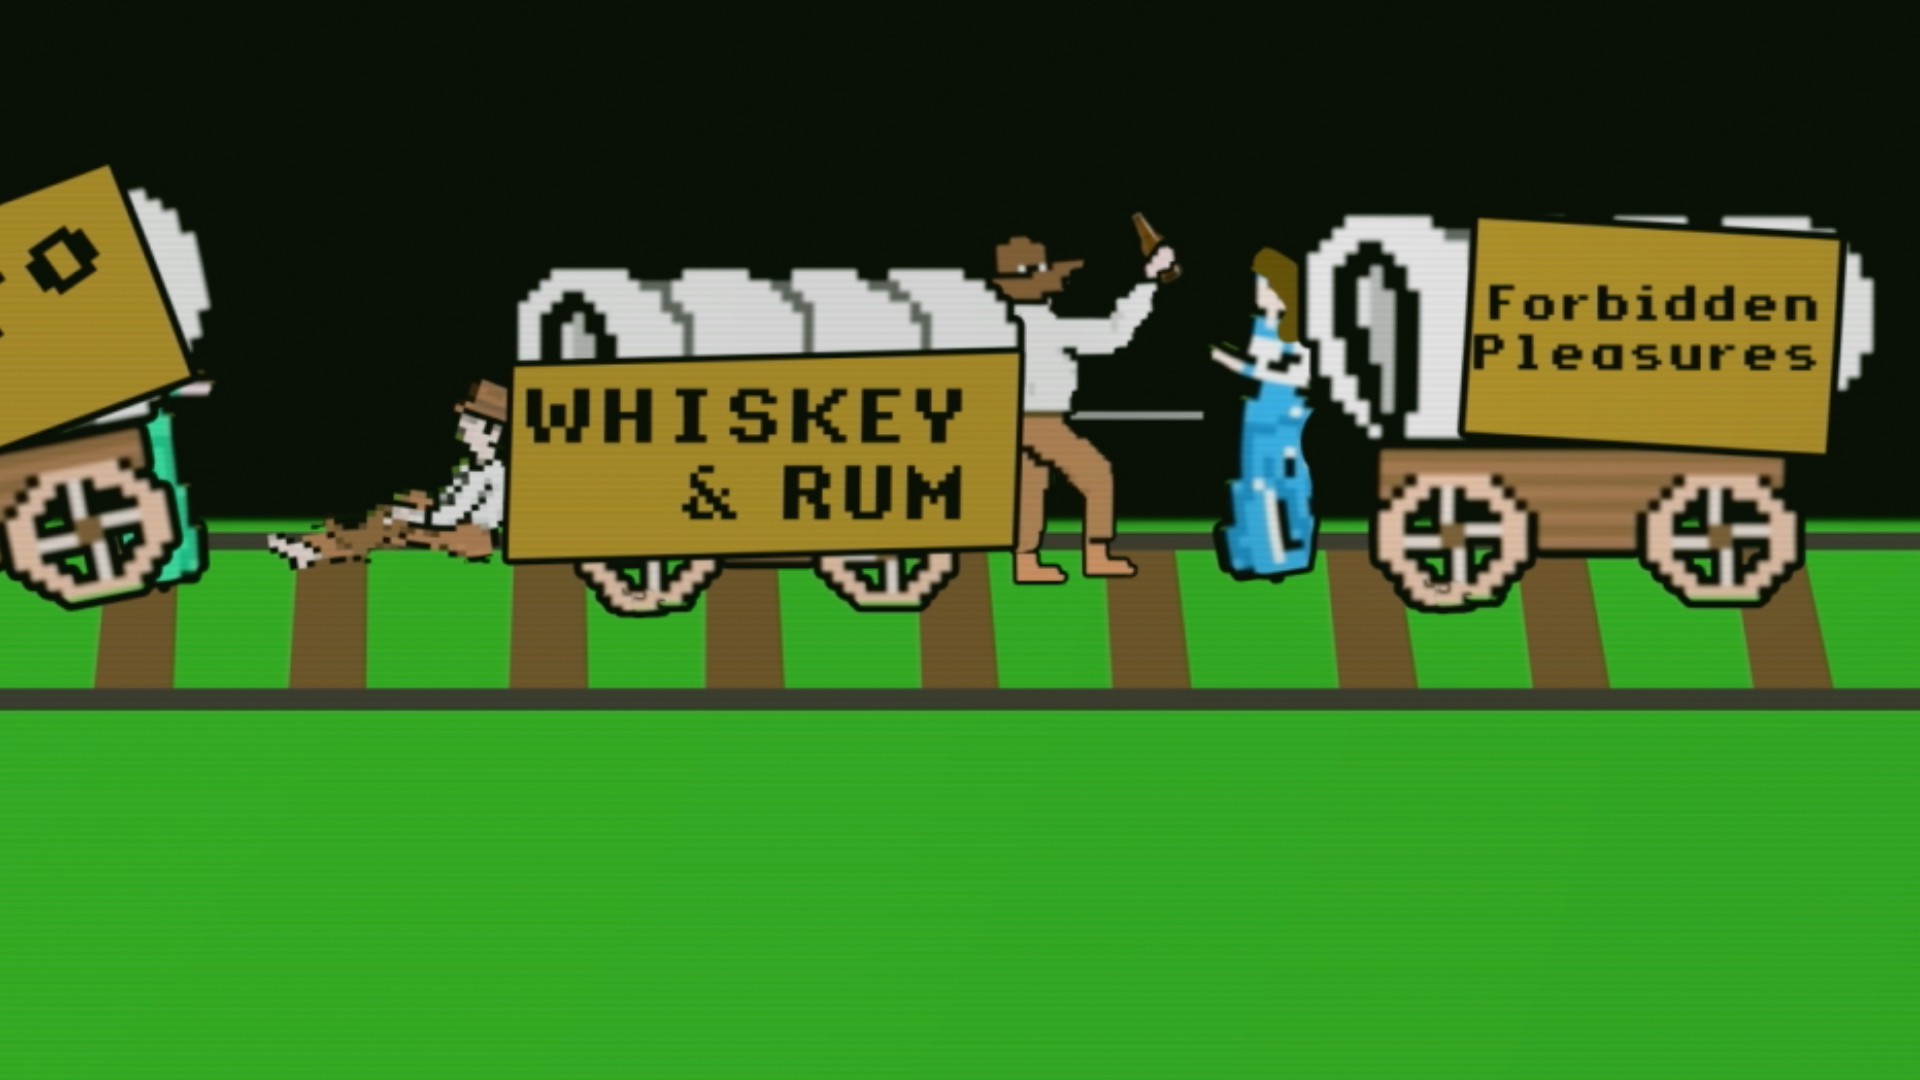 The R-rated Oregon Trail awaits.